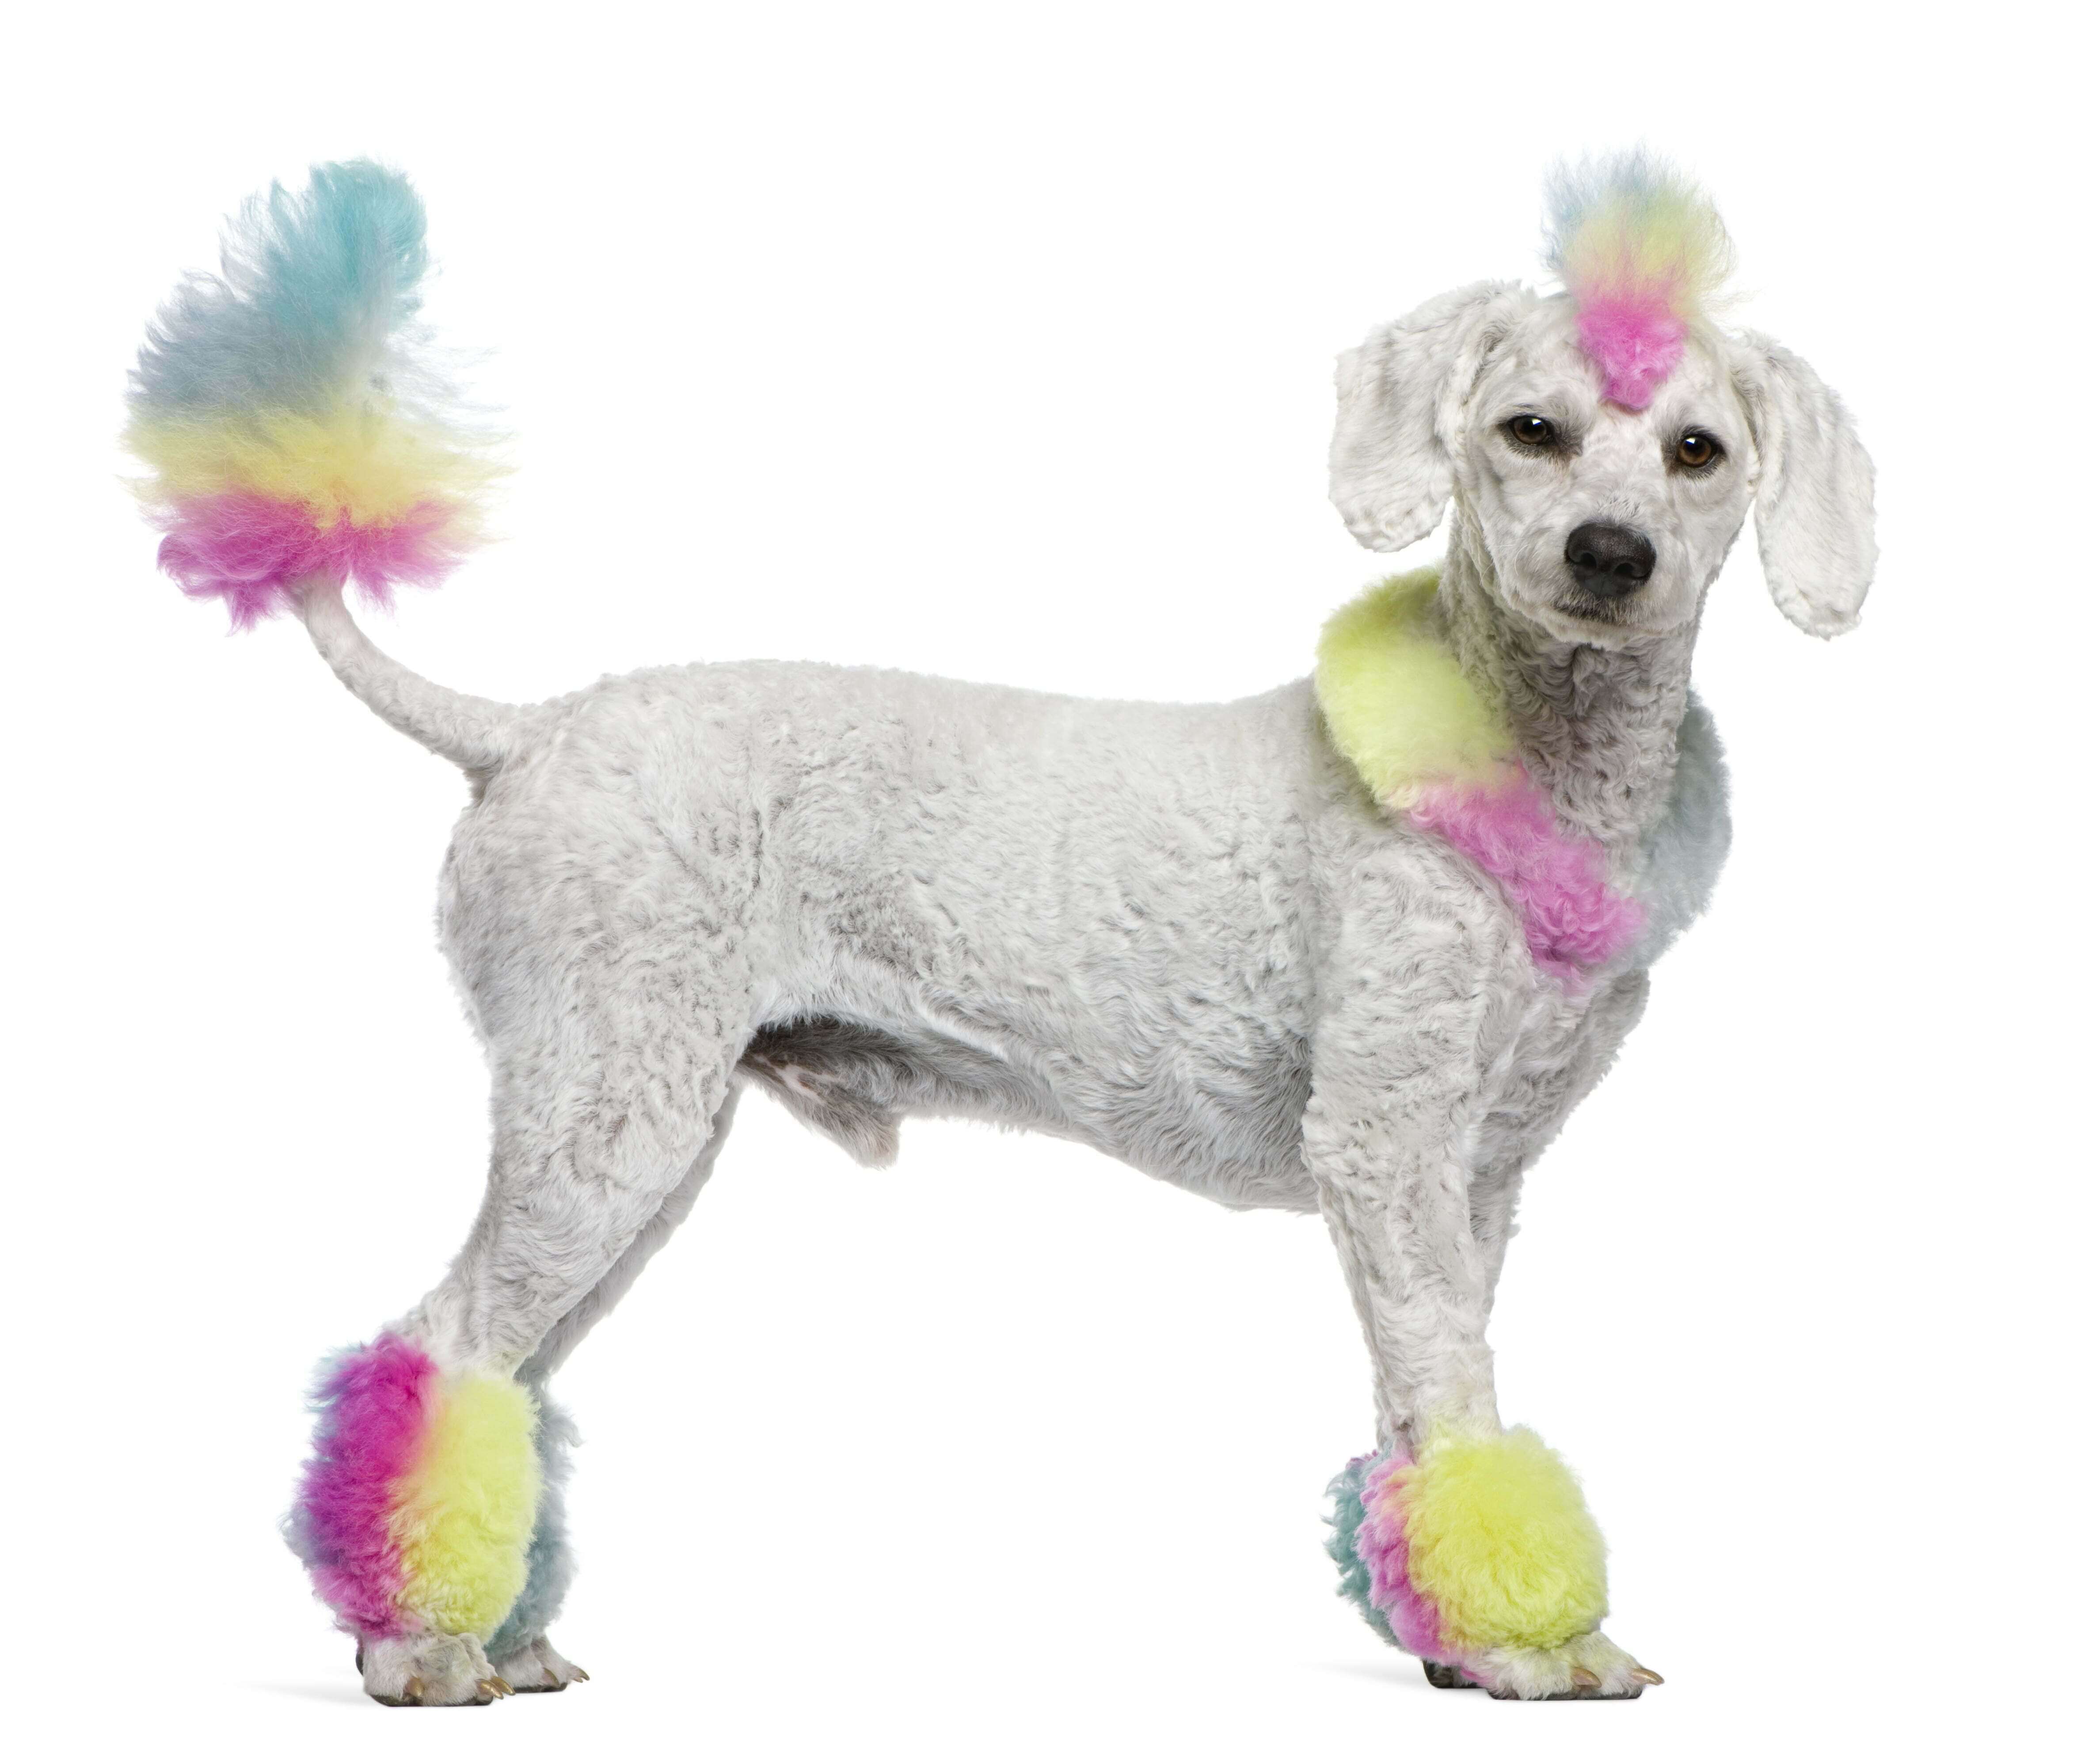 poodle with bright colored fur